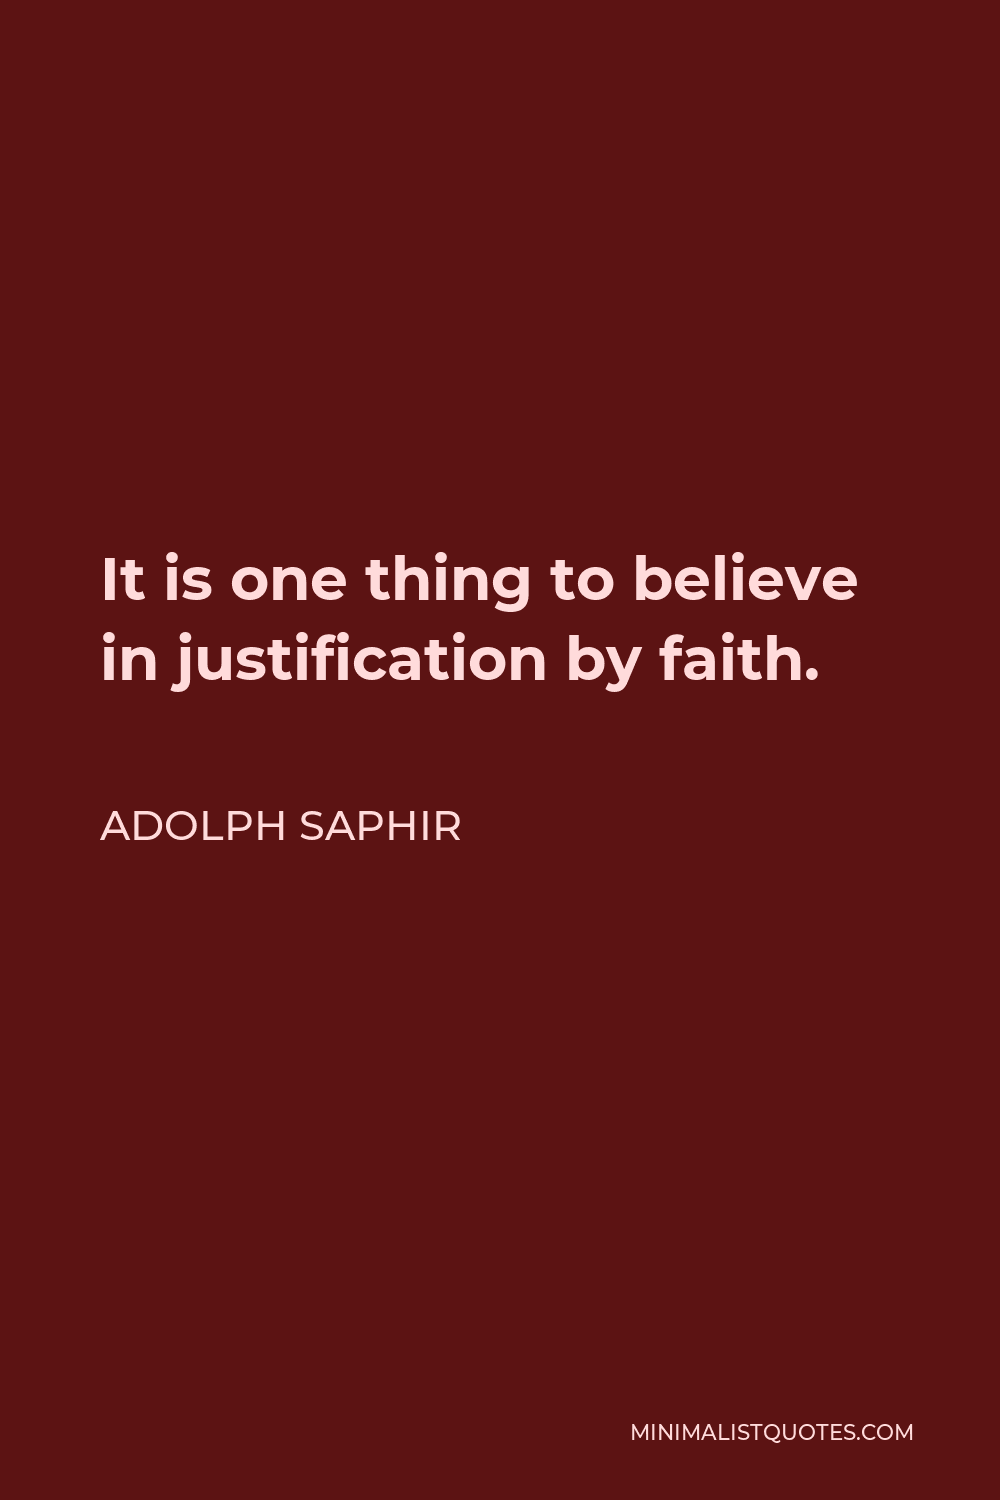 Adolph Saphir Quote - It is one thing to believe in justification by faith.